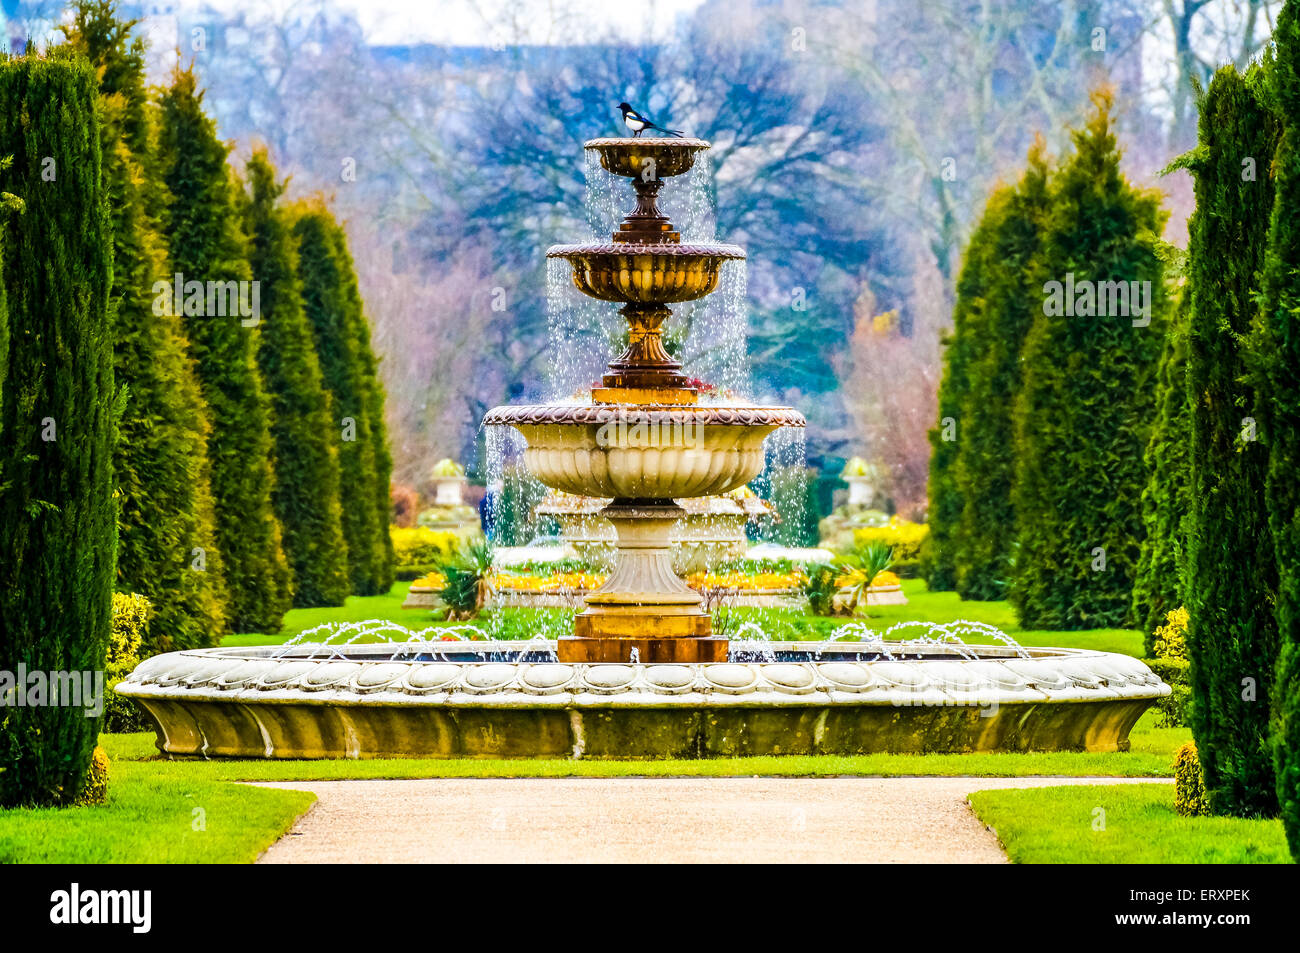 Elegant Fountain With Dripping Water in Regent's Park, London Stock Photo